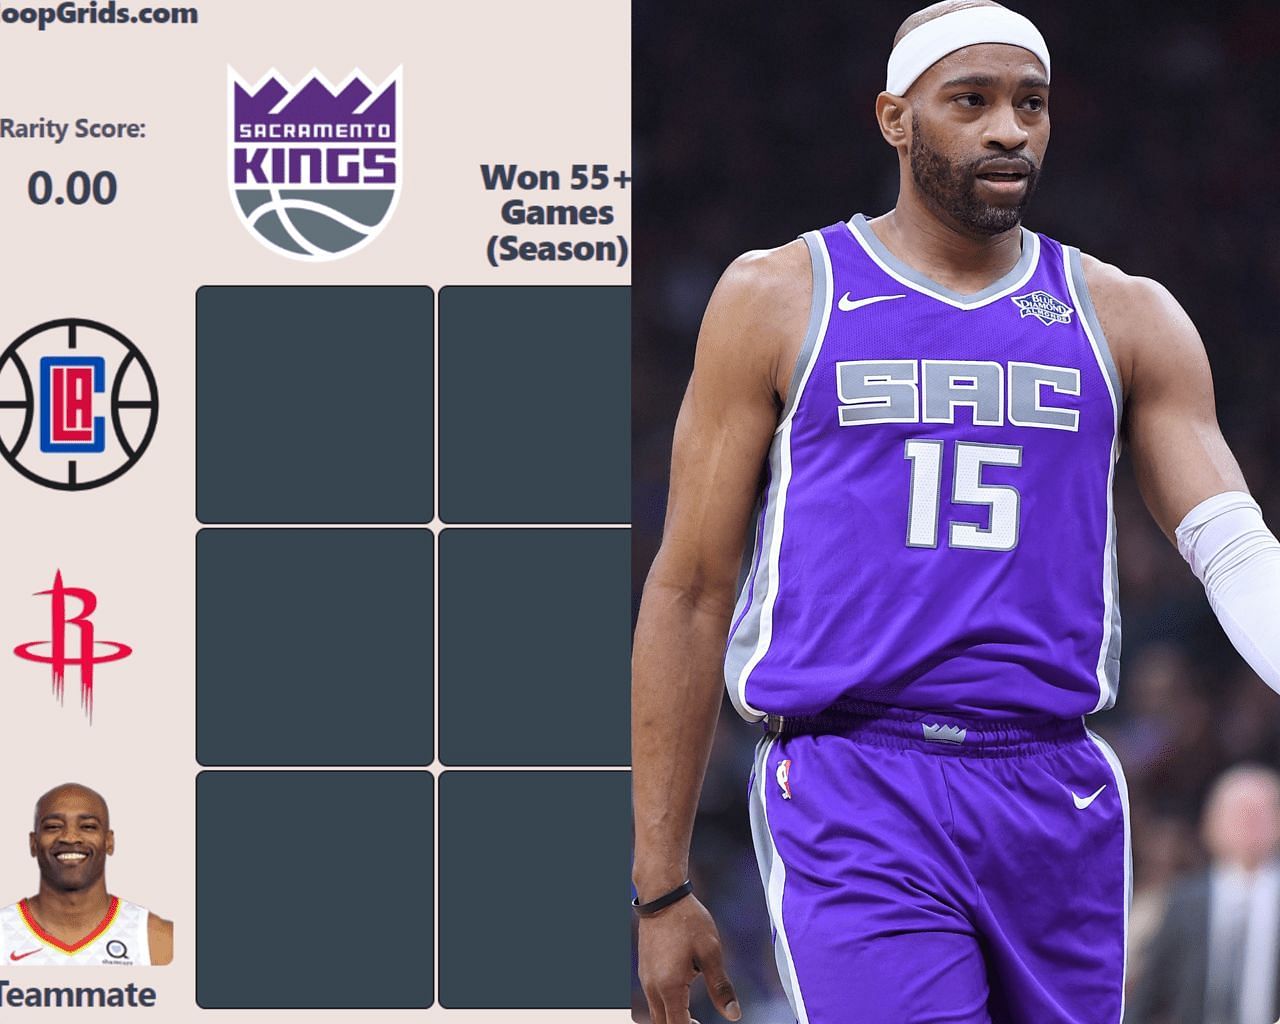 Vince Carter fifth NBA player to play in 1,500 games